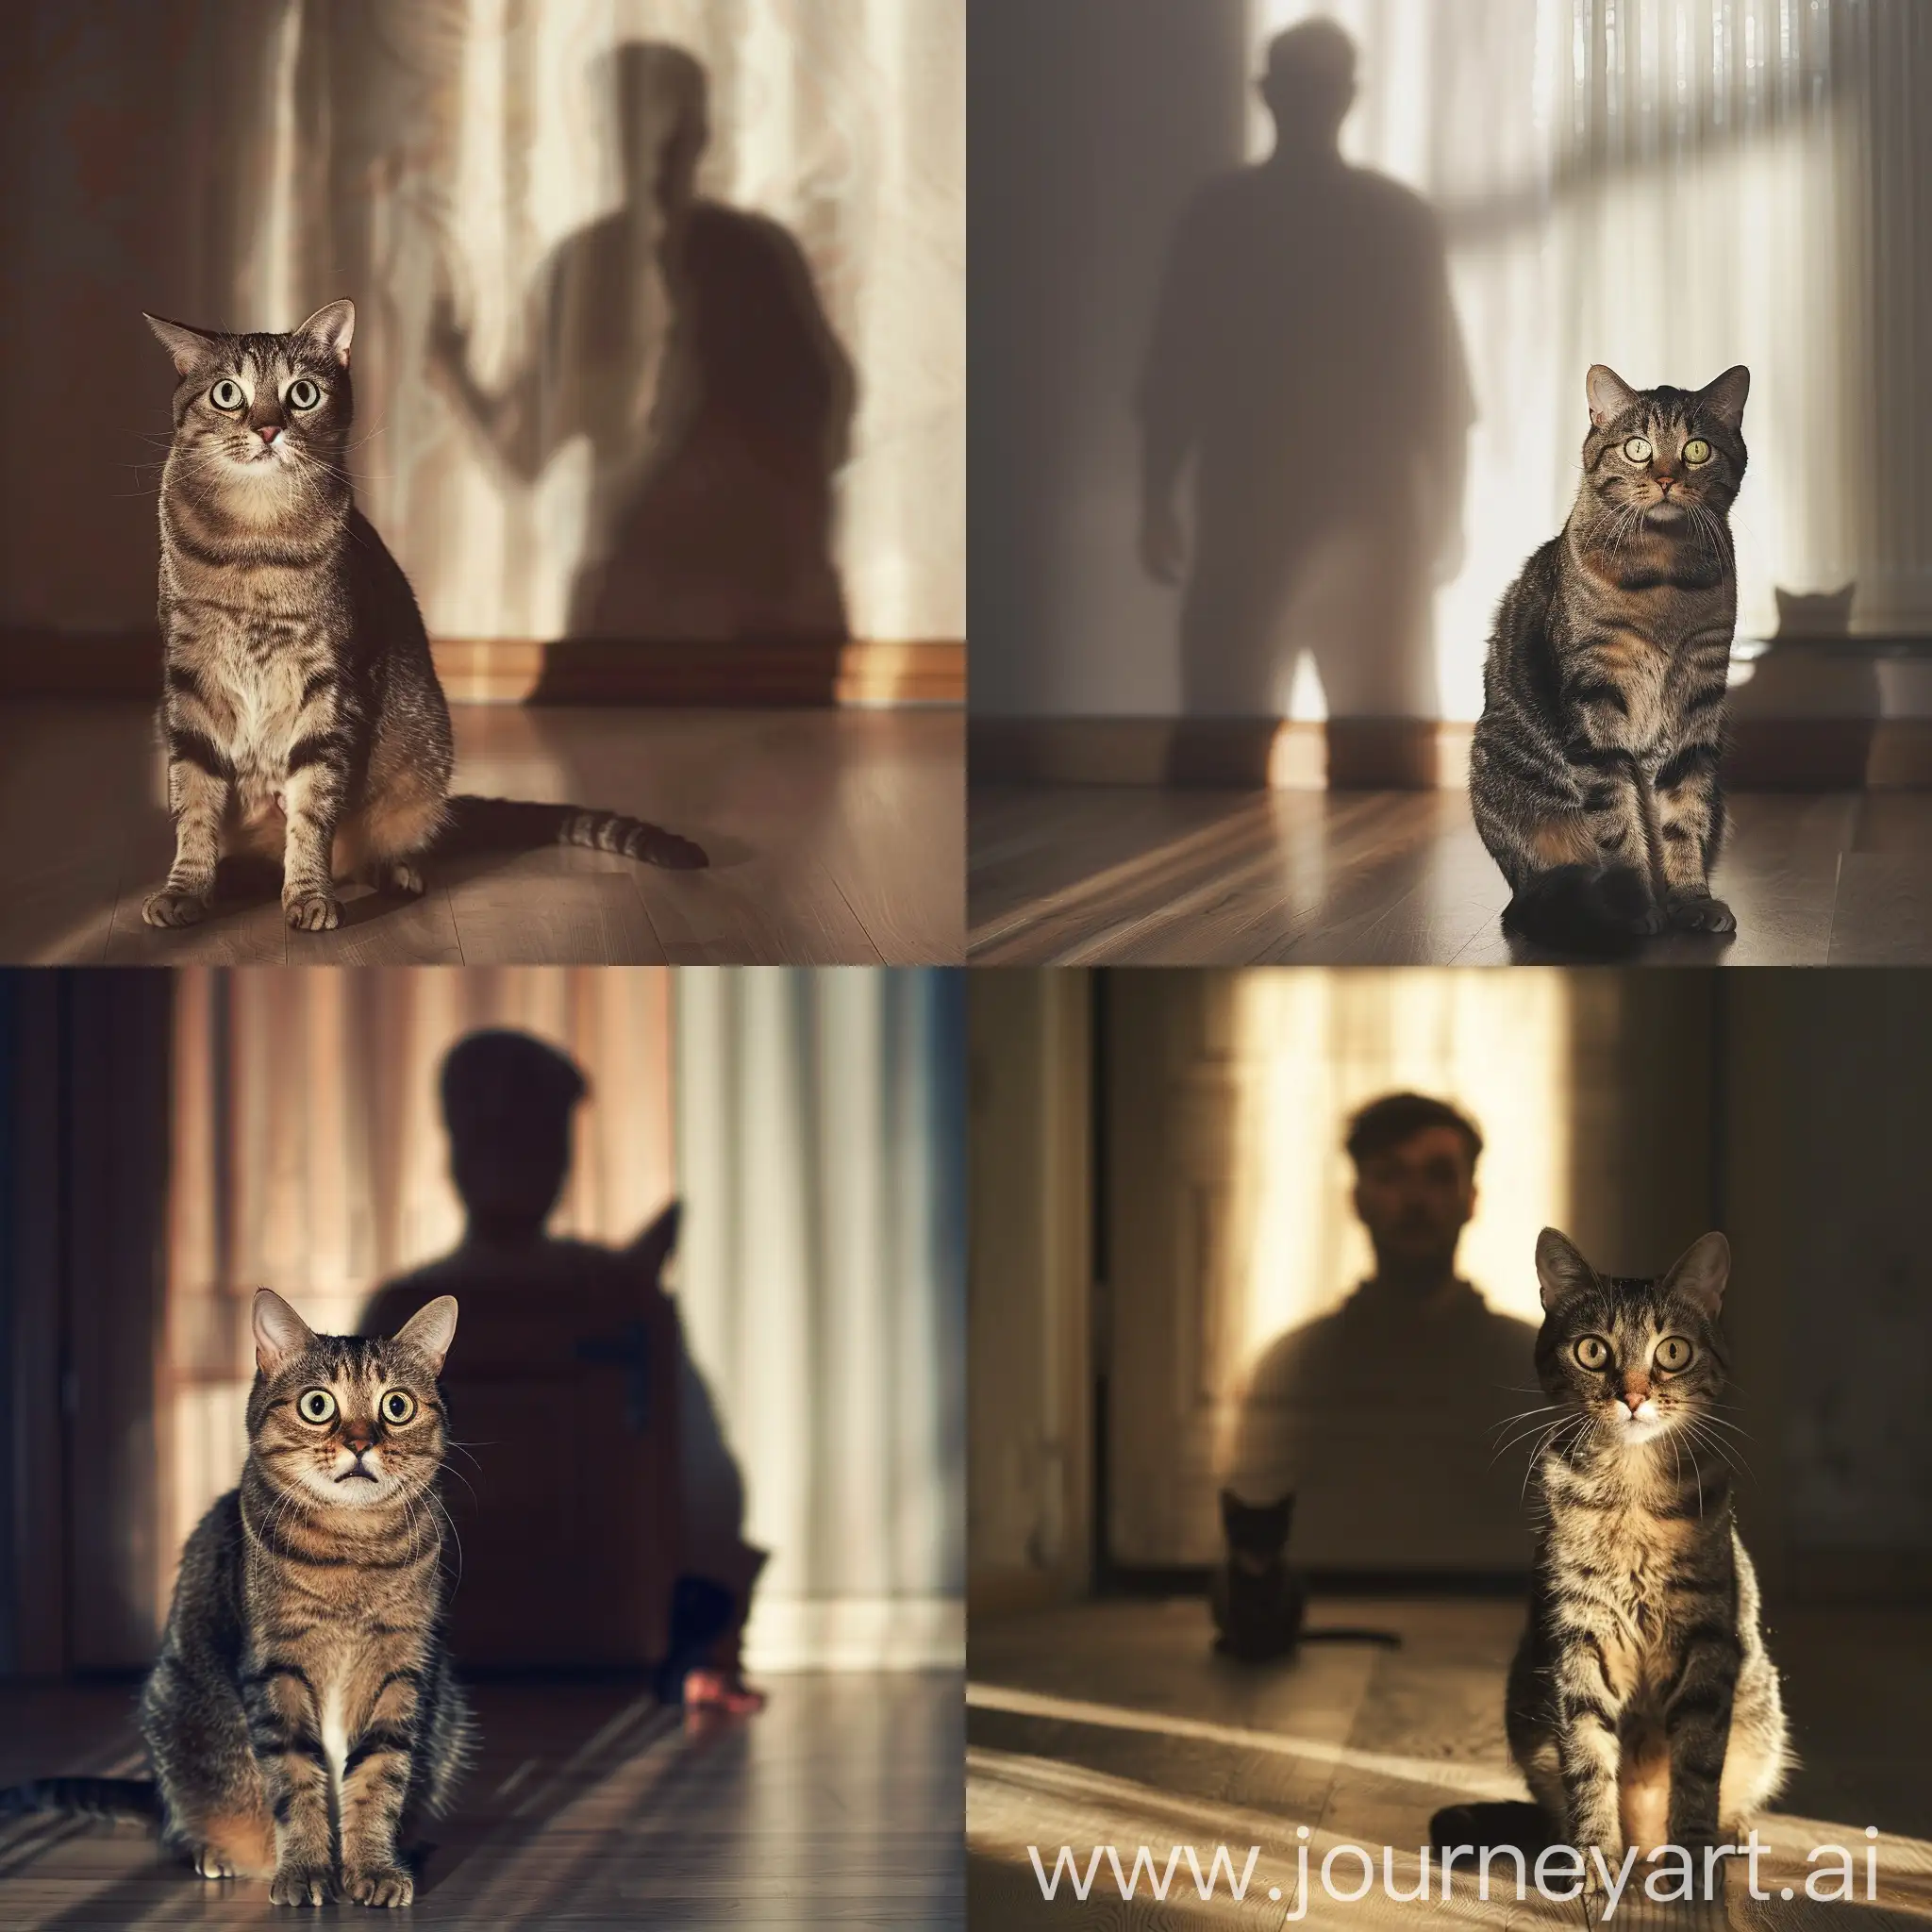 a cat looking afraid in a room with a shadow of man behind and postures of cat in the room